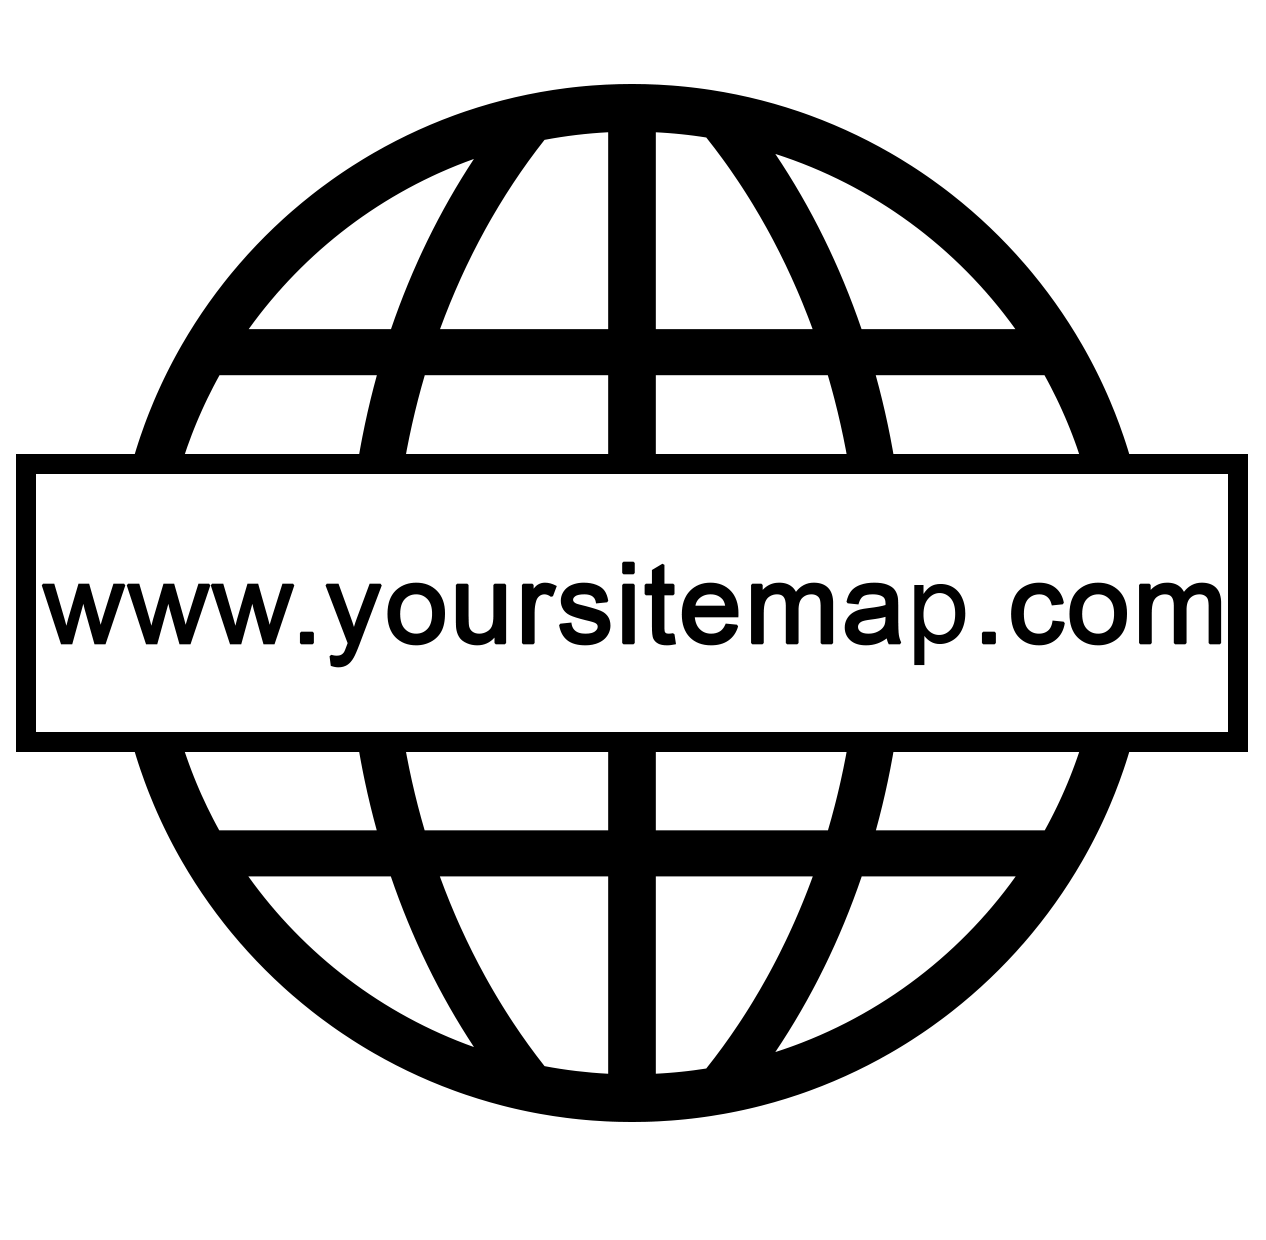 A Chance To Get Your Sitemap